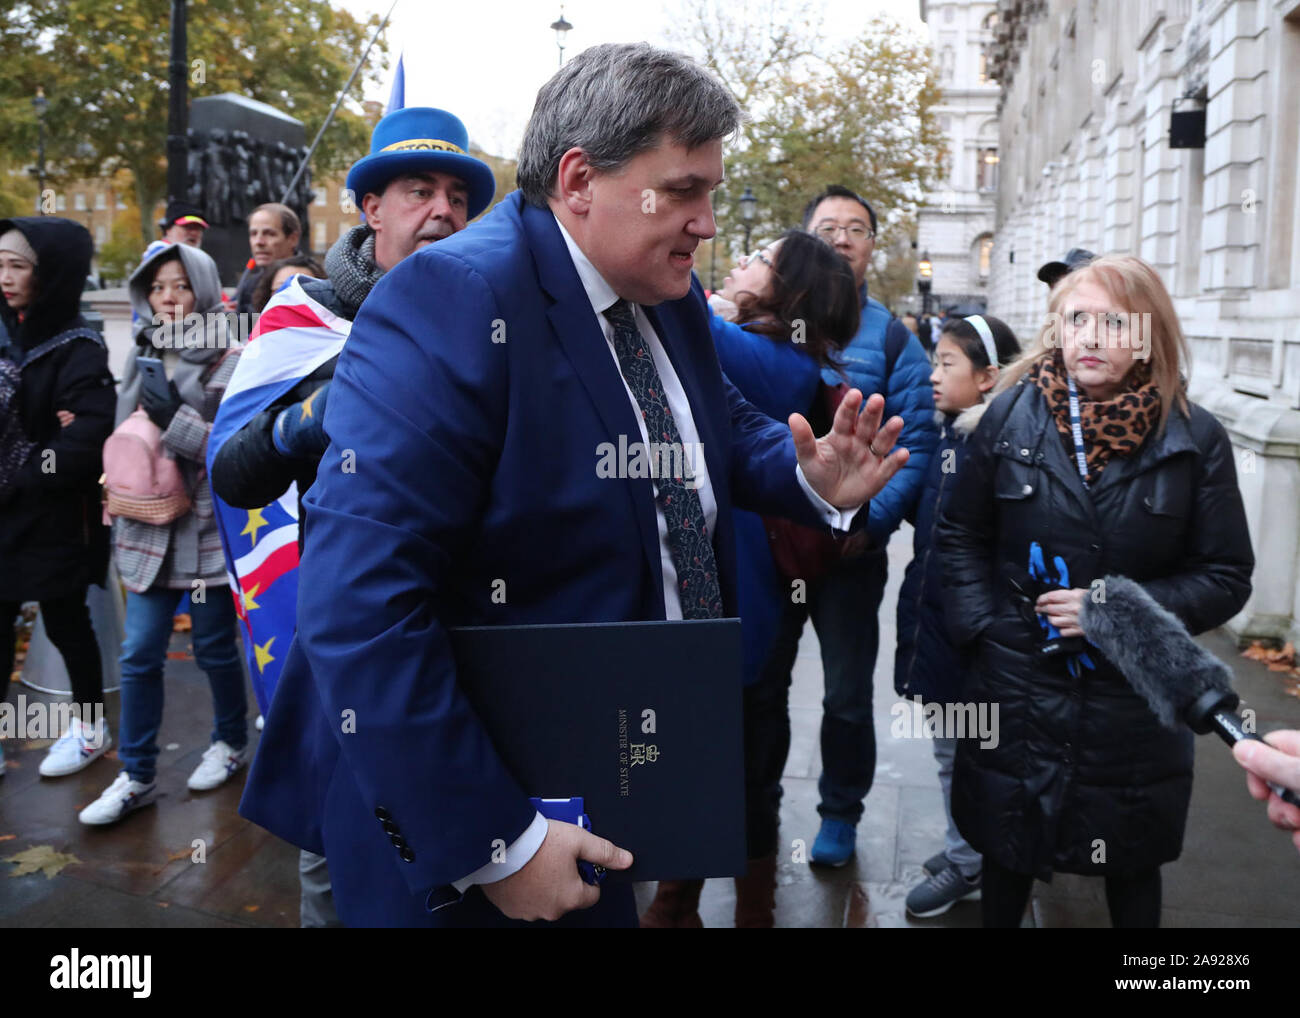 Housing Minister Kit Malthouse arriving at the Cabinet Office in London, ahead of a meeting of the Government's emergency committee Cobra, chaired by Prime Minister Boris Johnson in Downing Street, to discuss the response to recent flooding in the North of England. Stock Photo